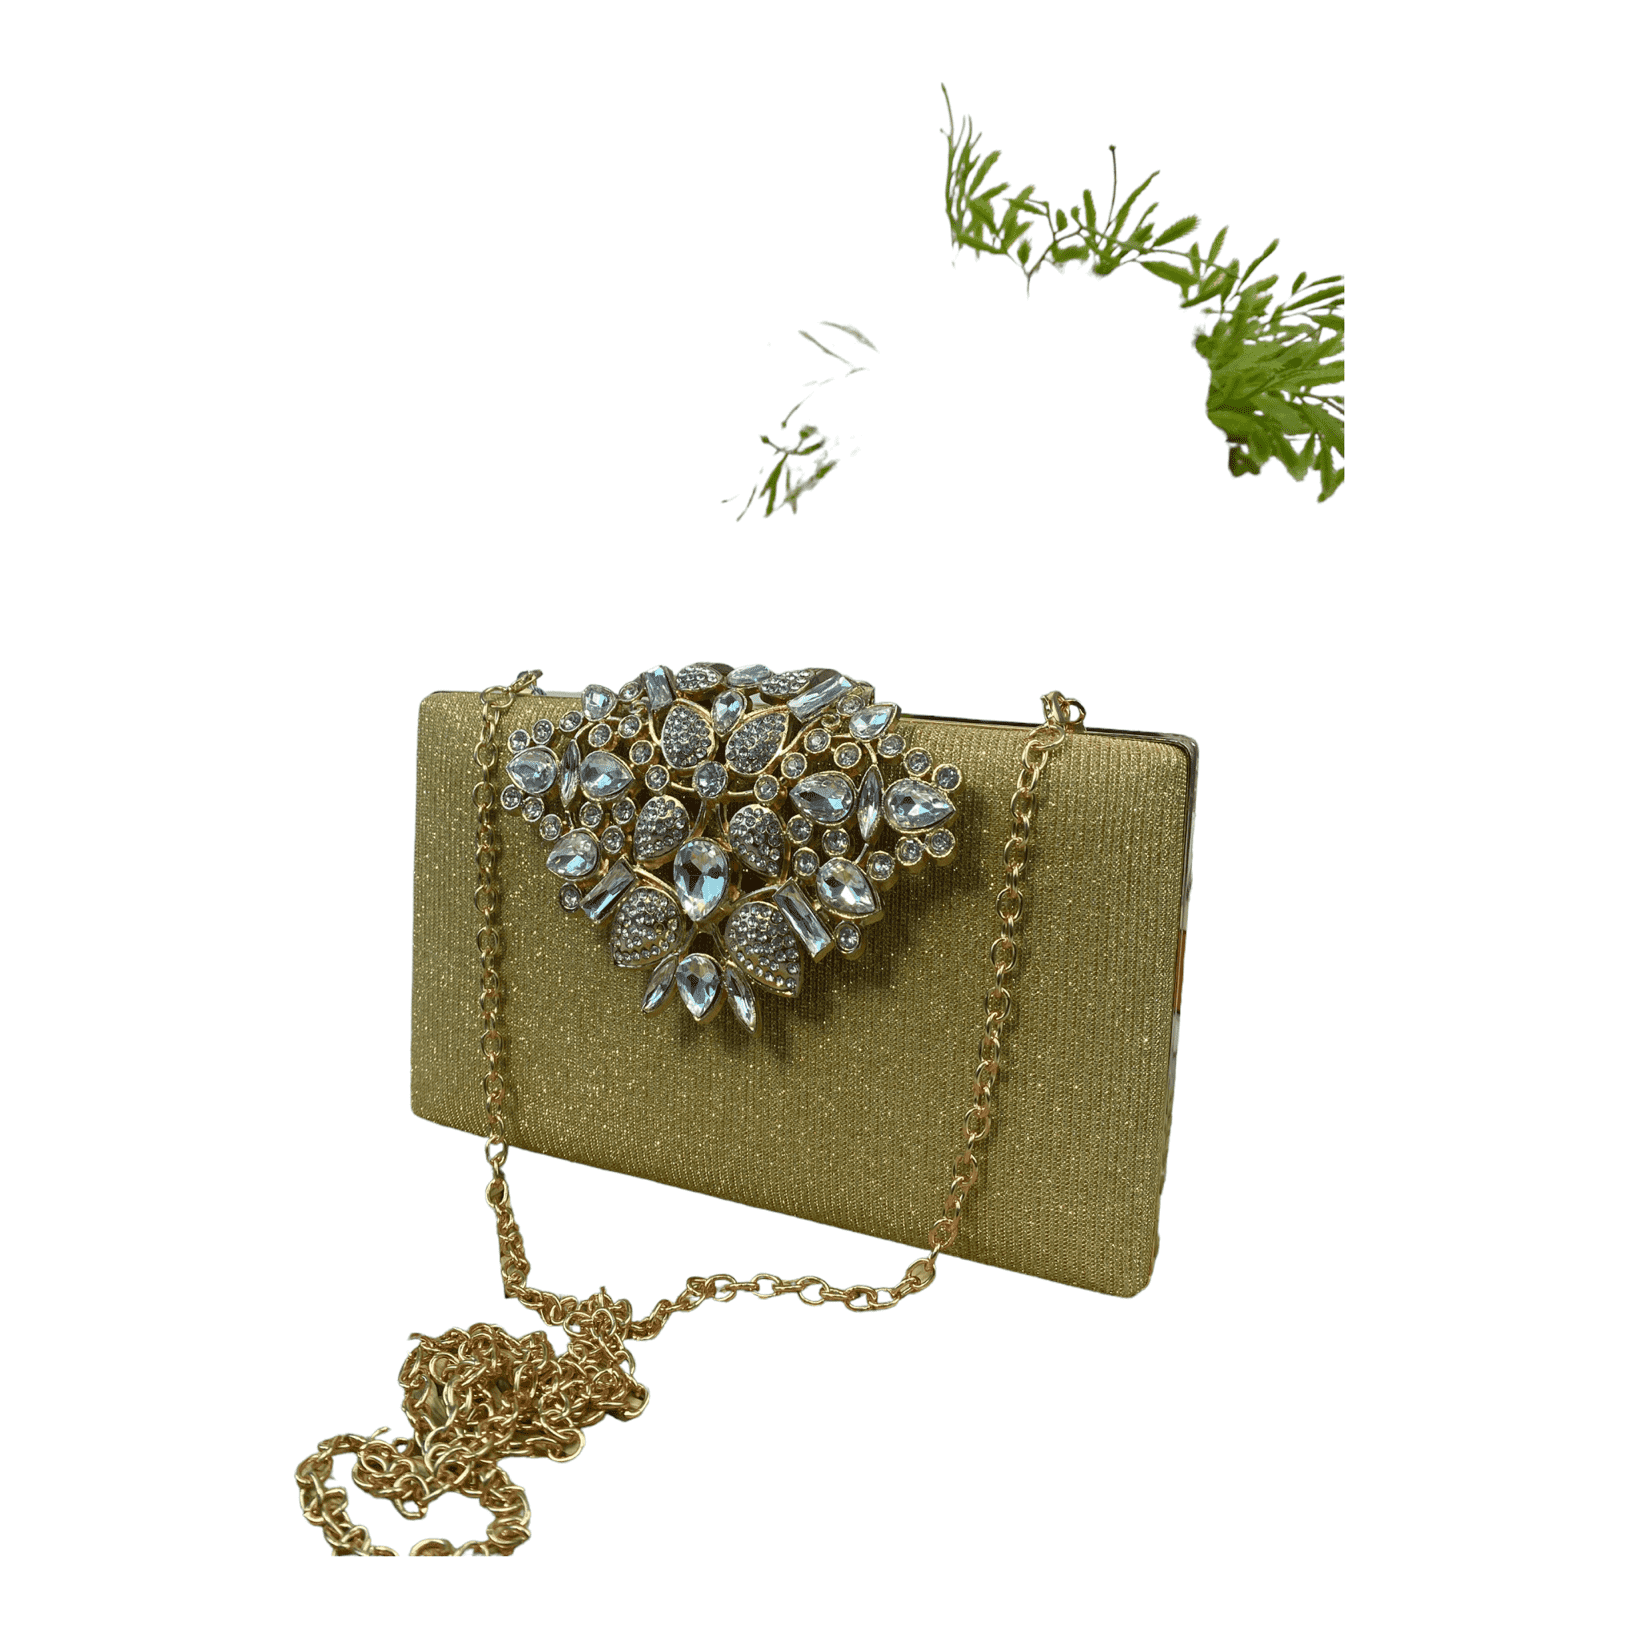 CHRISBELLA GOLD EMBELLISHED FRONT CLASP CLUTCH PURSE